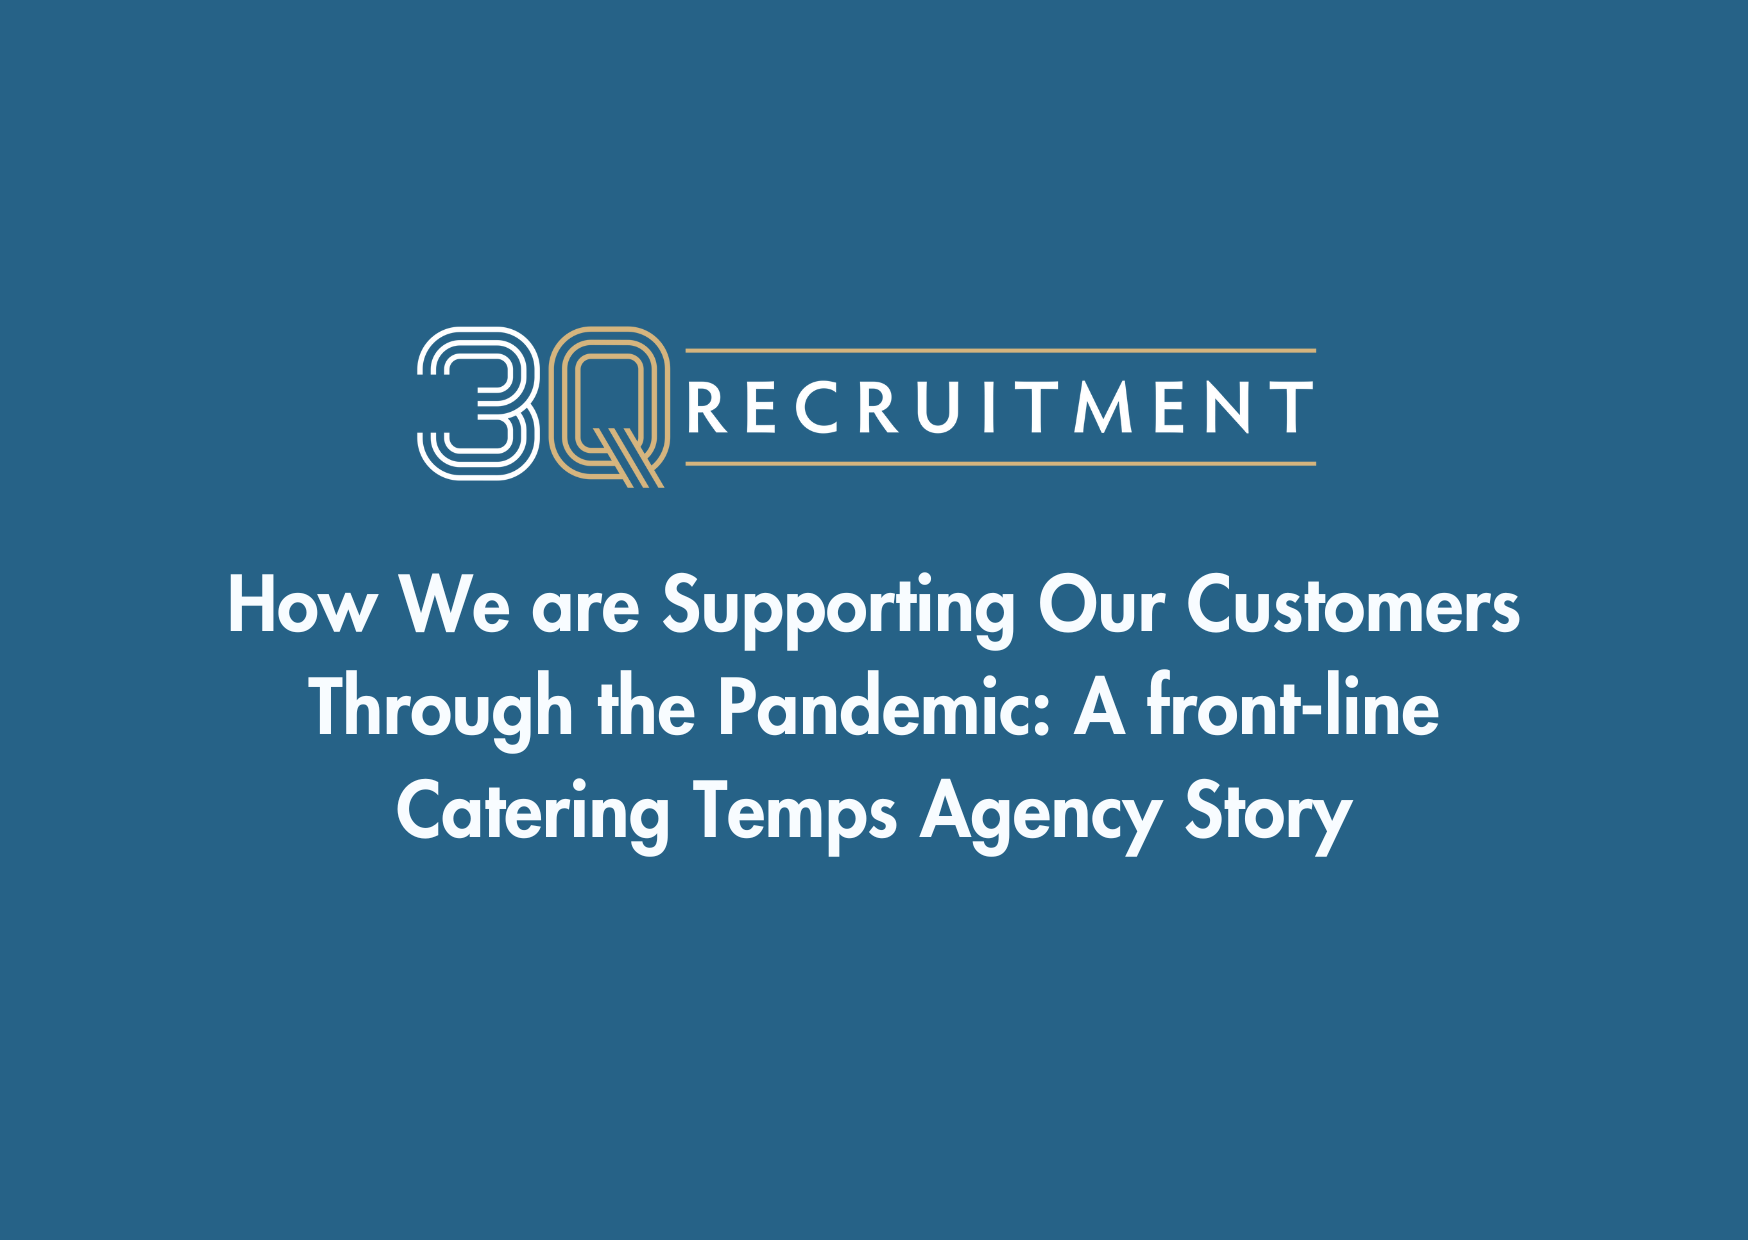 3Q Recruitment How We are Supporting Our Customers Through the Pandemic: A front-line Catering Temps Agency Story